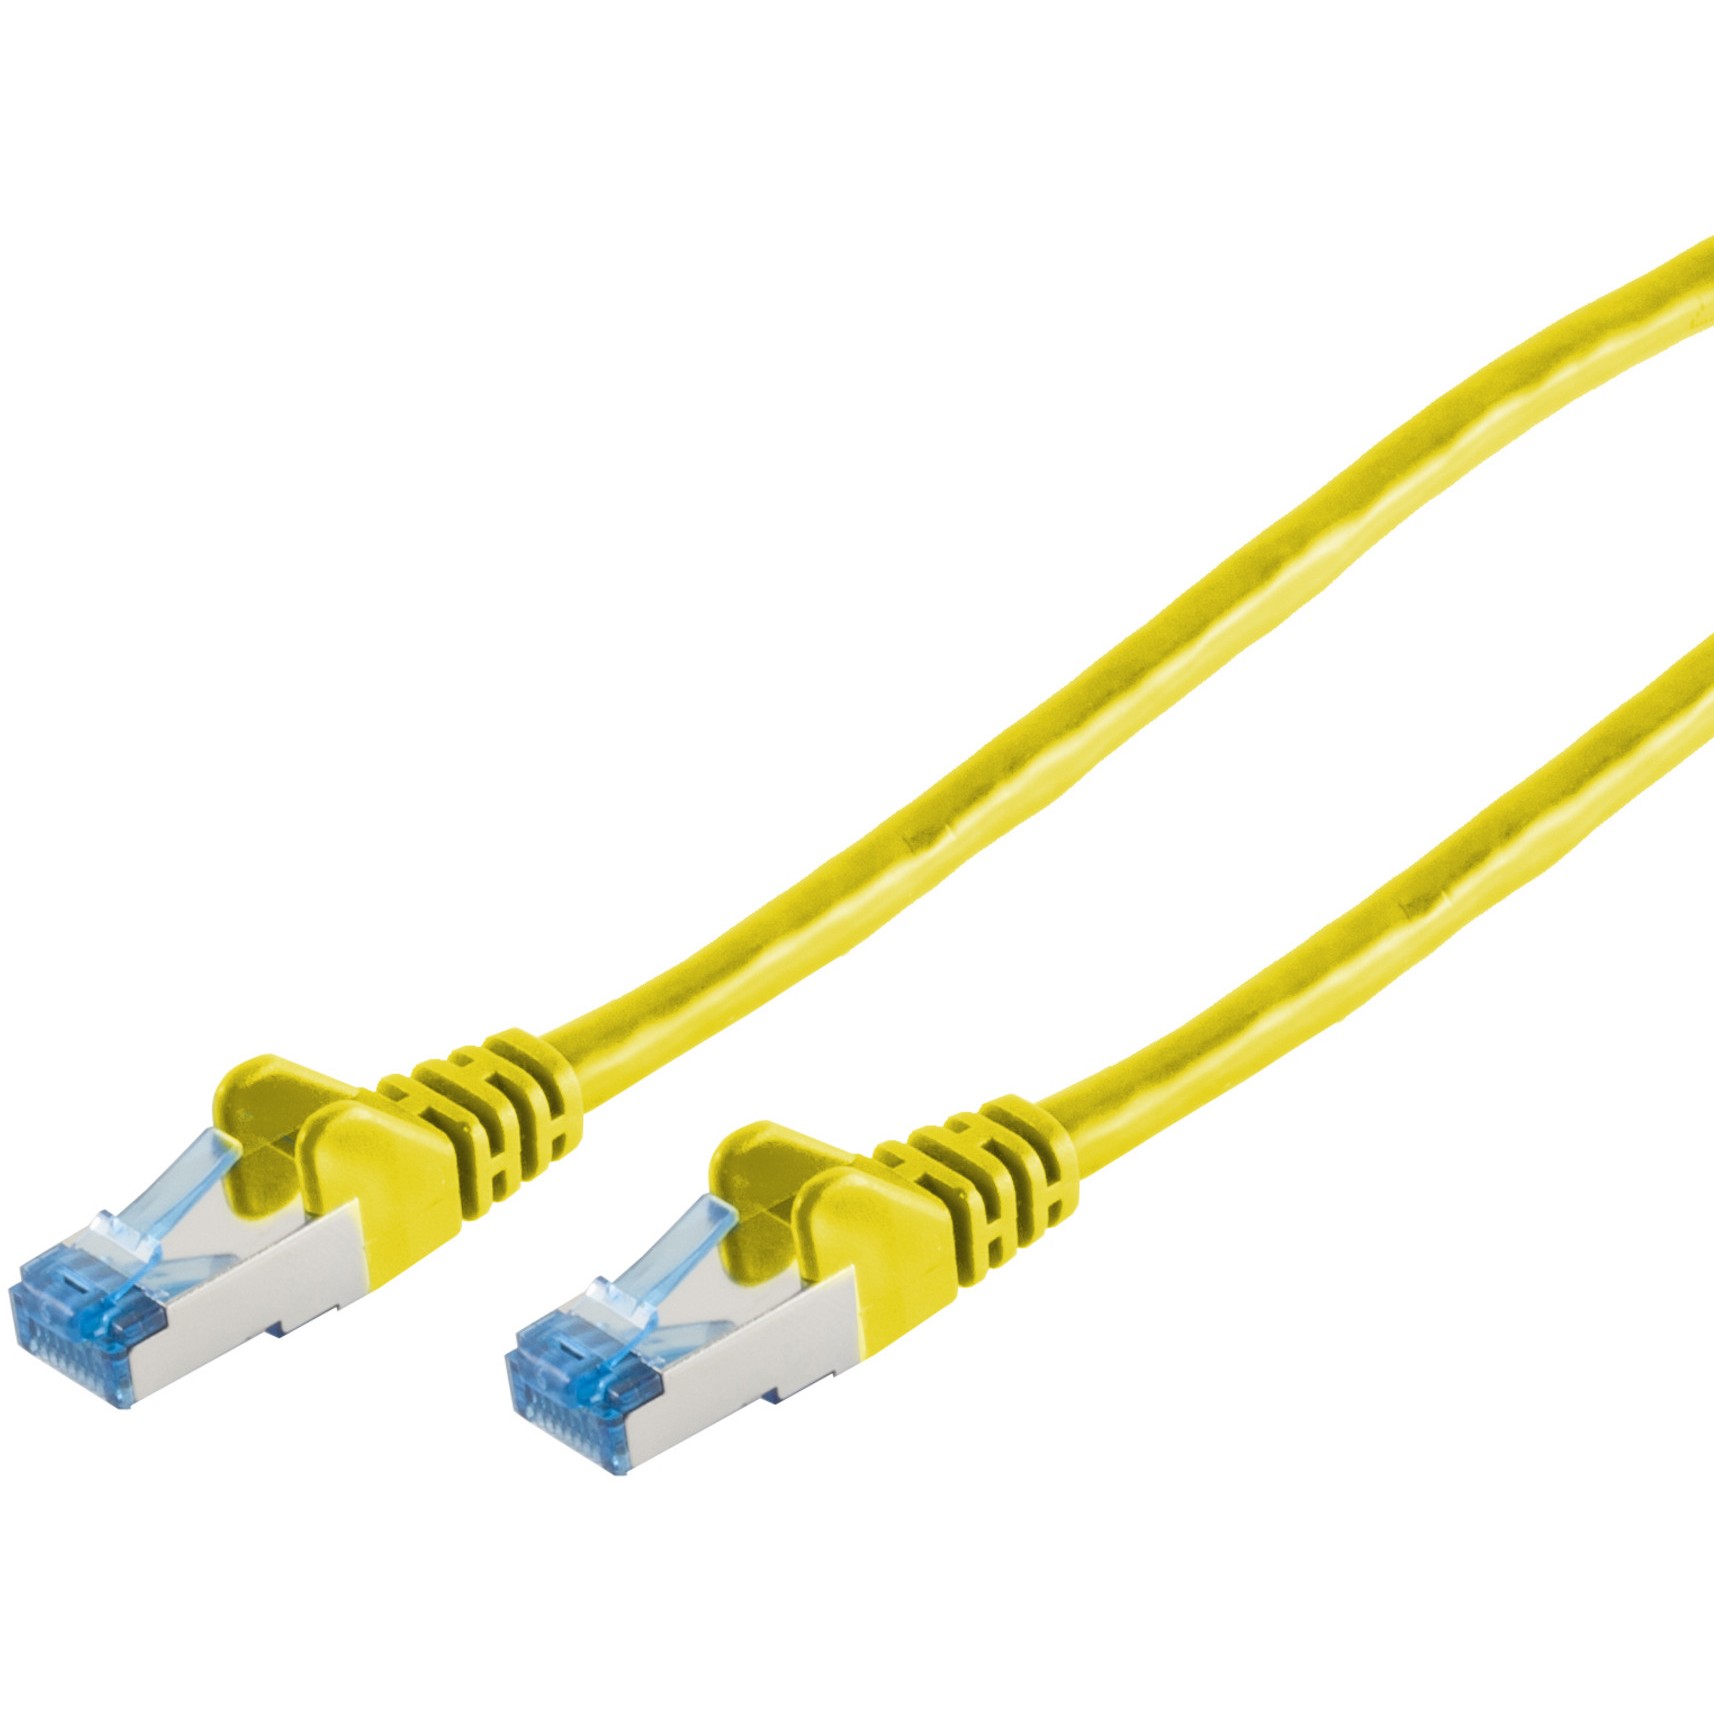 S-Conn 75715-Y networking cable